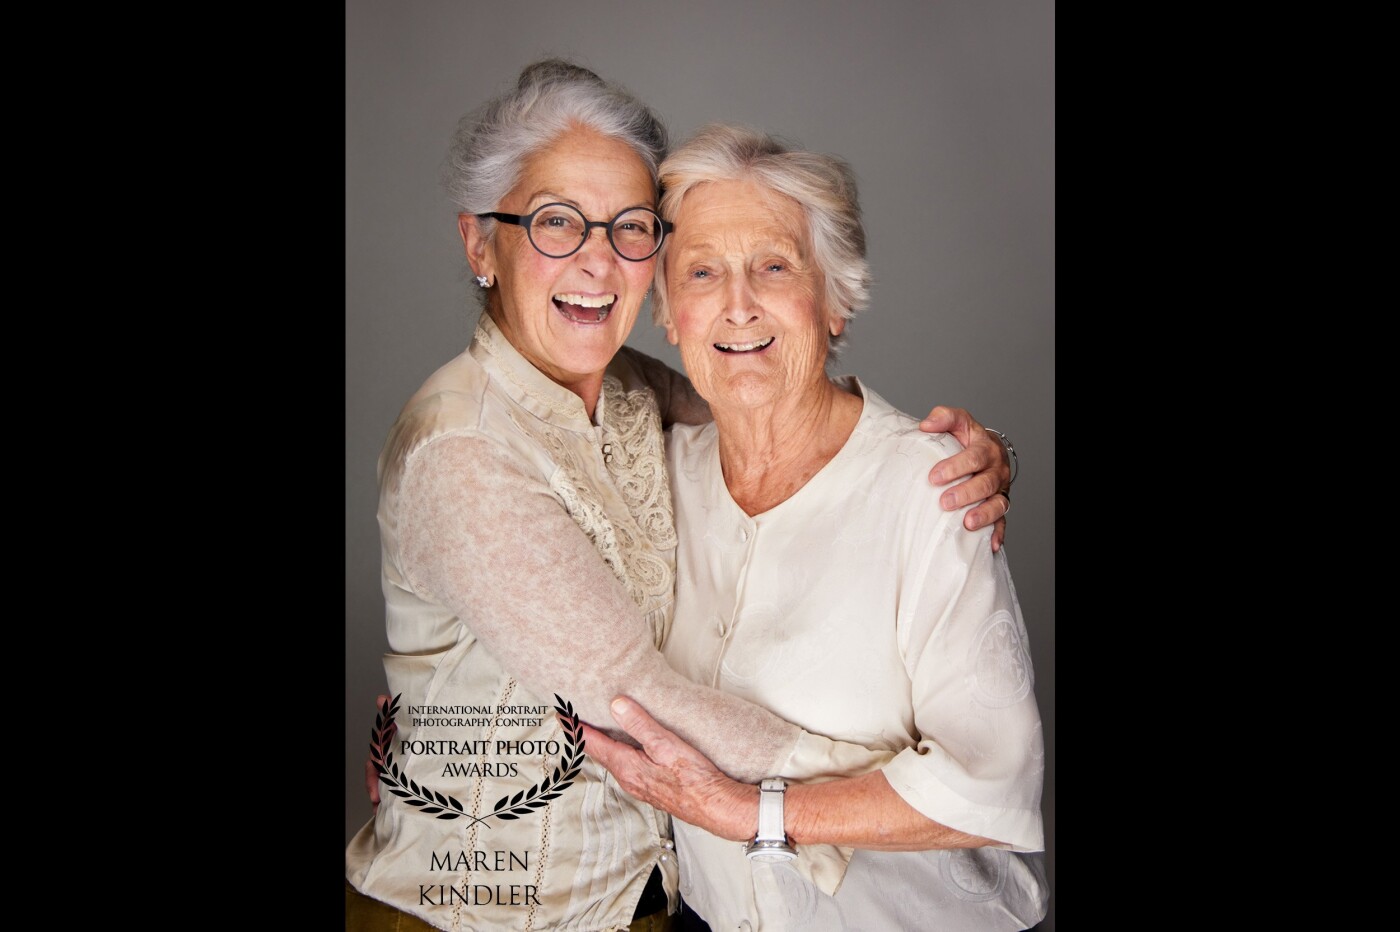 The photo session was planned as a portrait session for her mum who just turned 93. As the daughter organised the session I also wanted to shoot both together for a life time memory. And this is the result - having fun together in front of my camera.